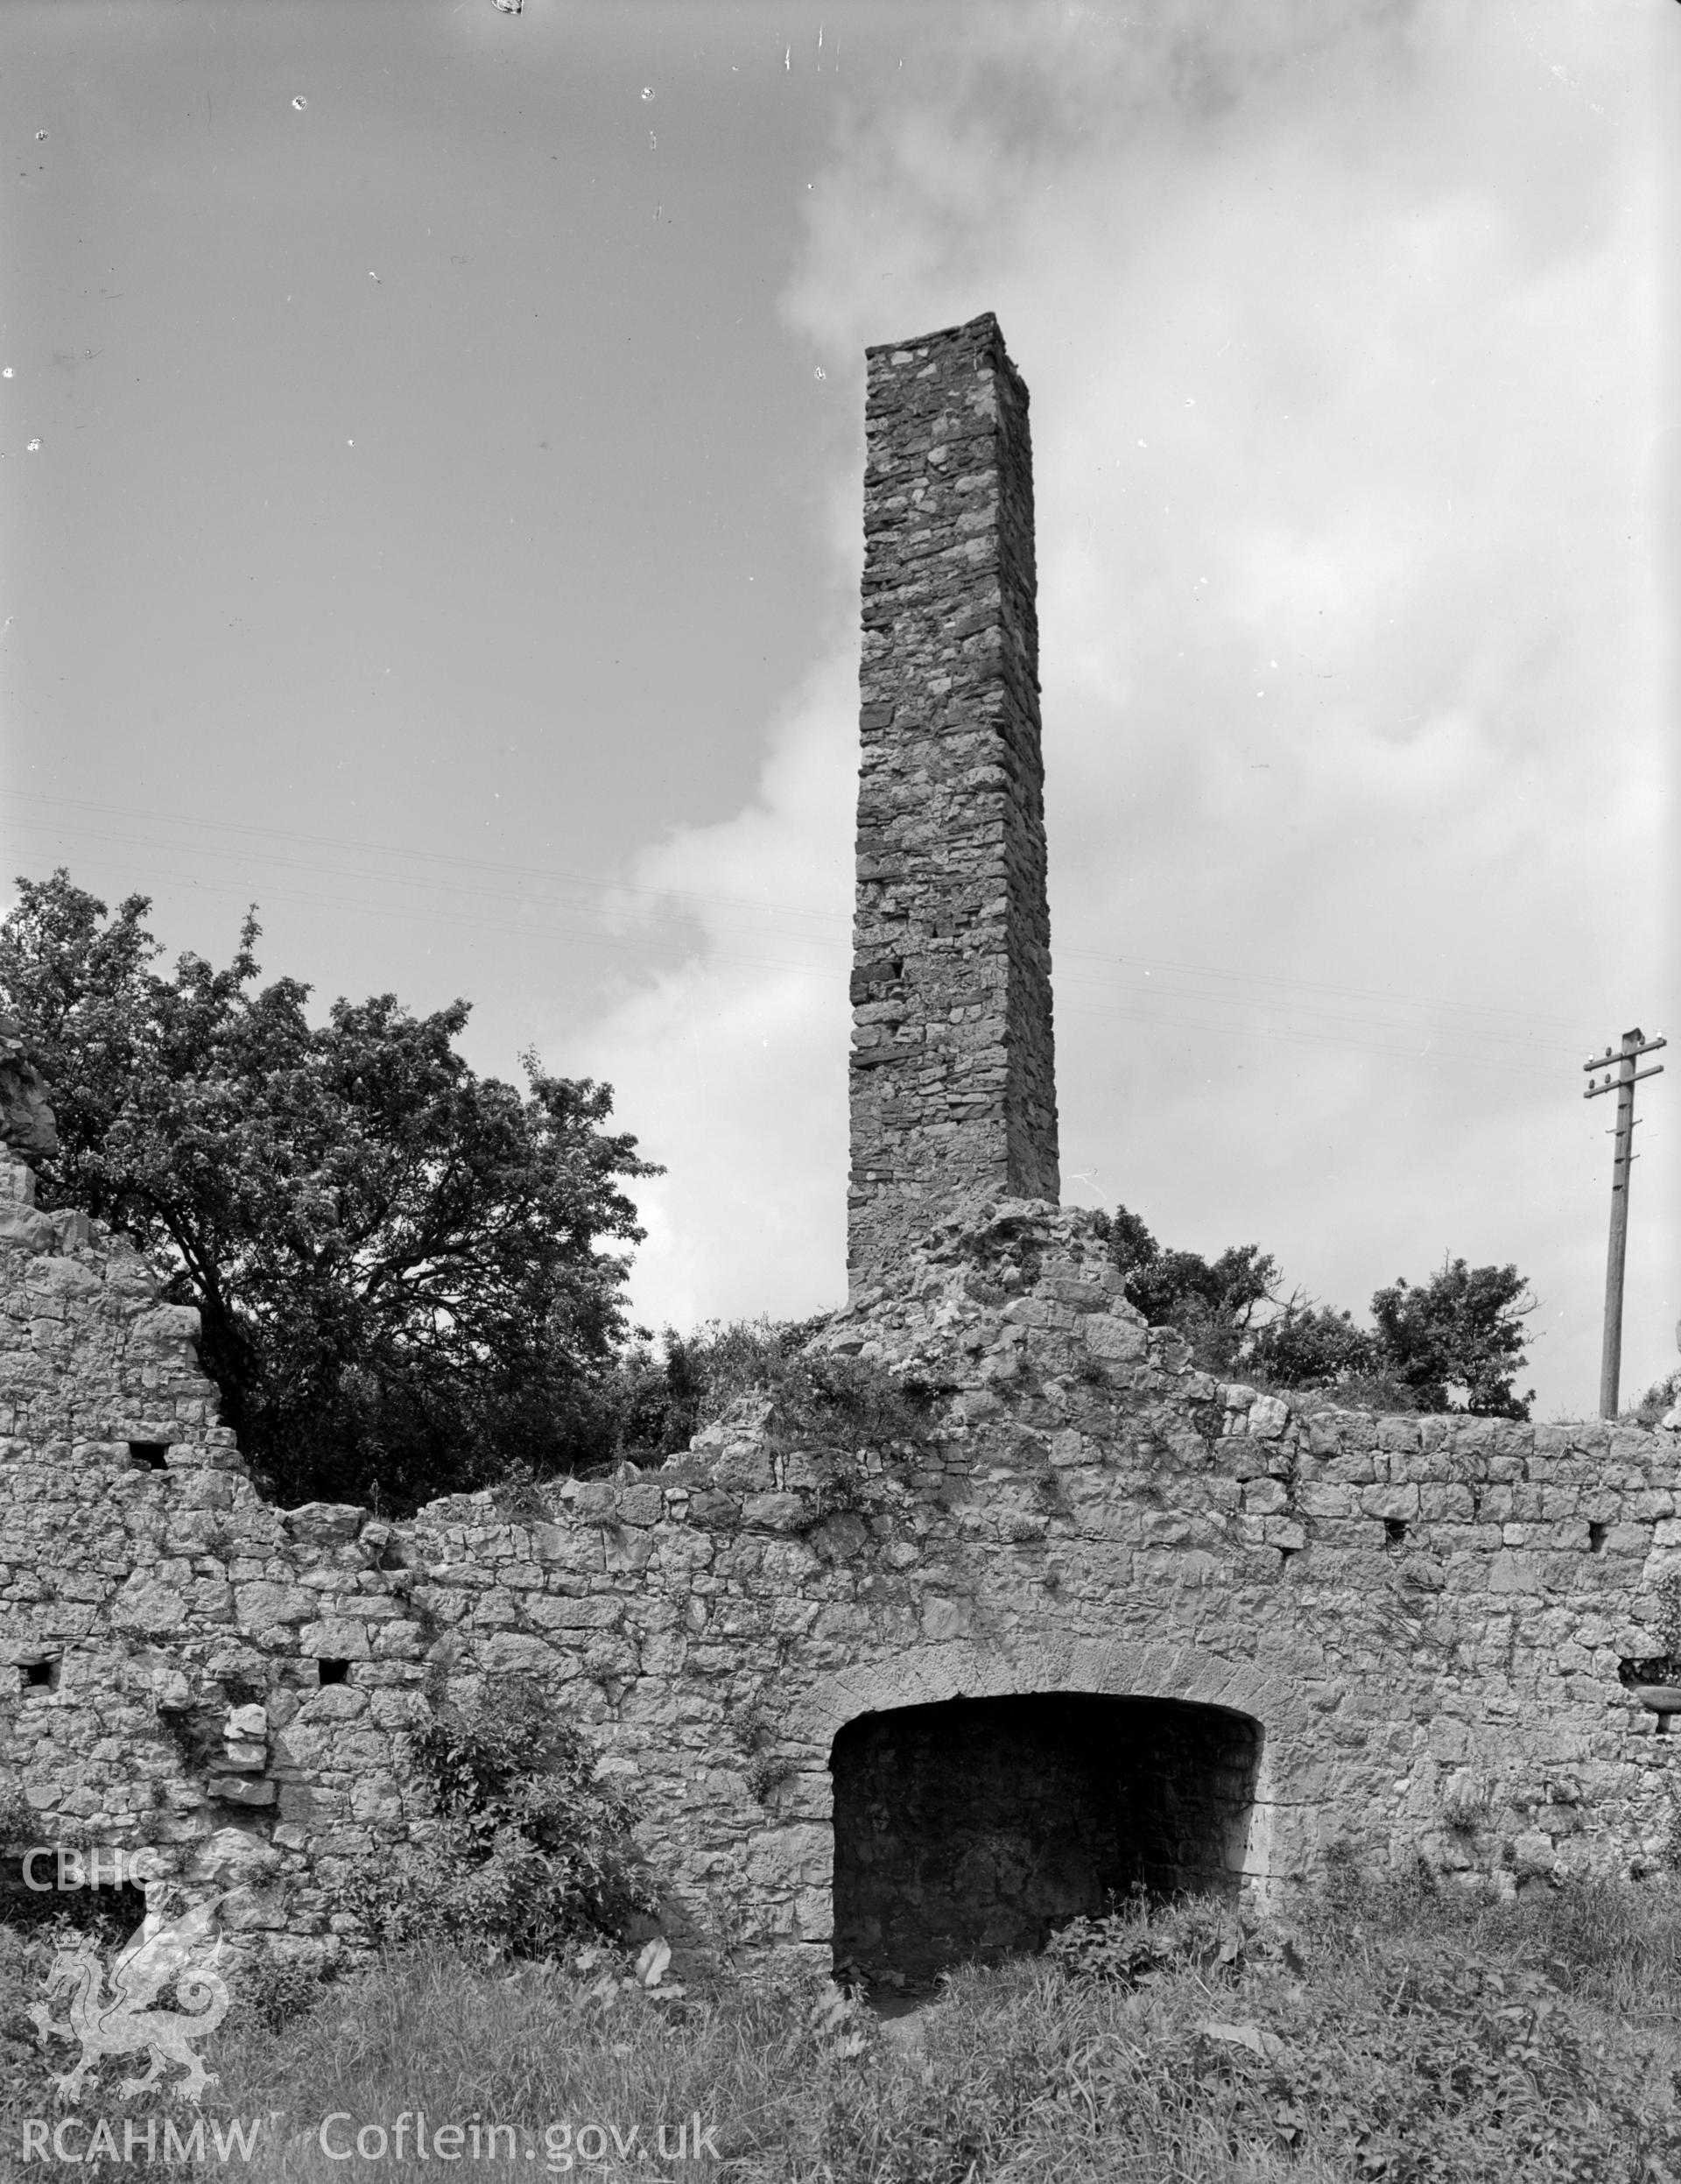 A view of a diagonal chimney and fireplace remains